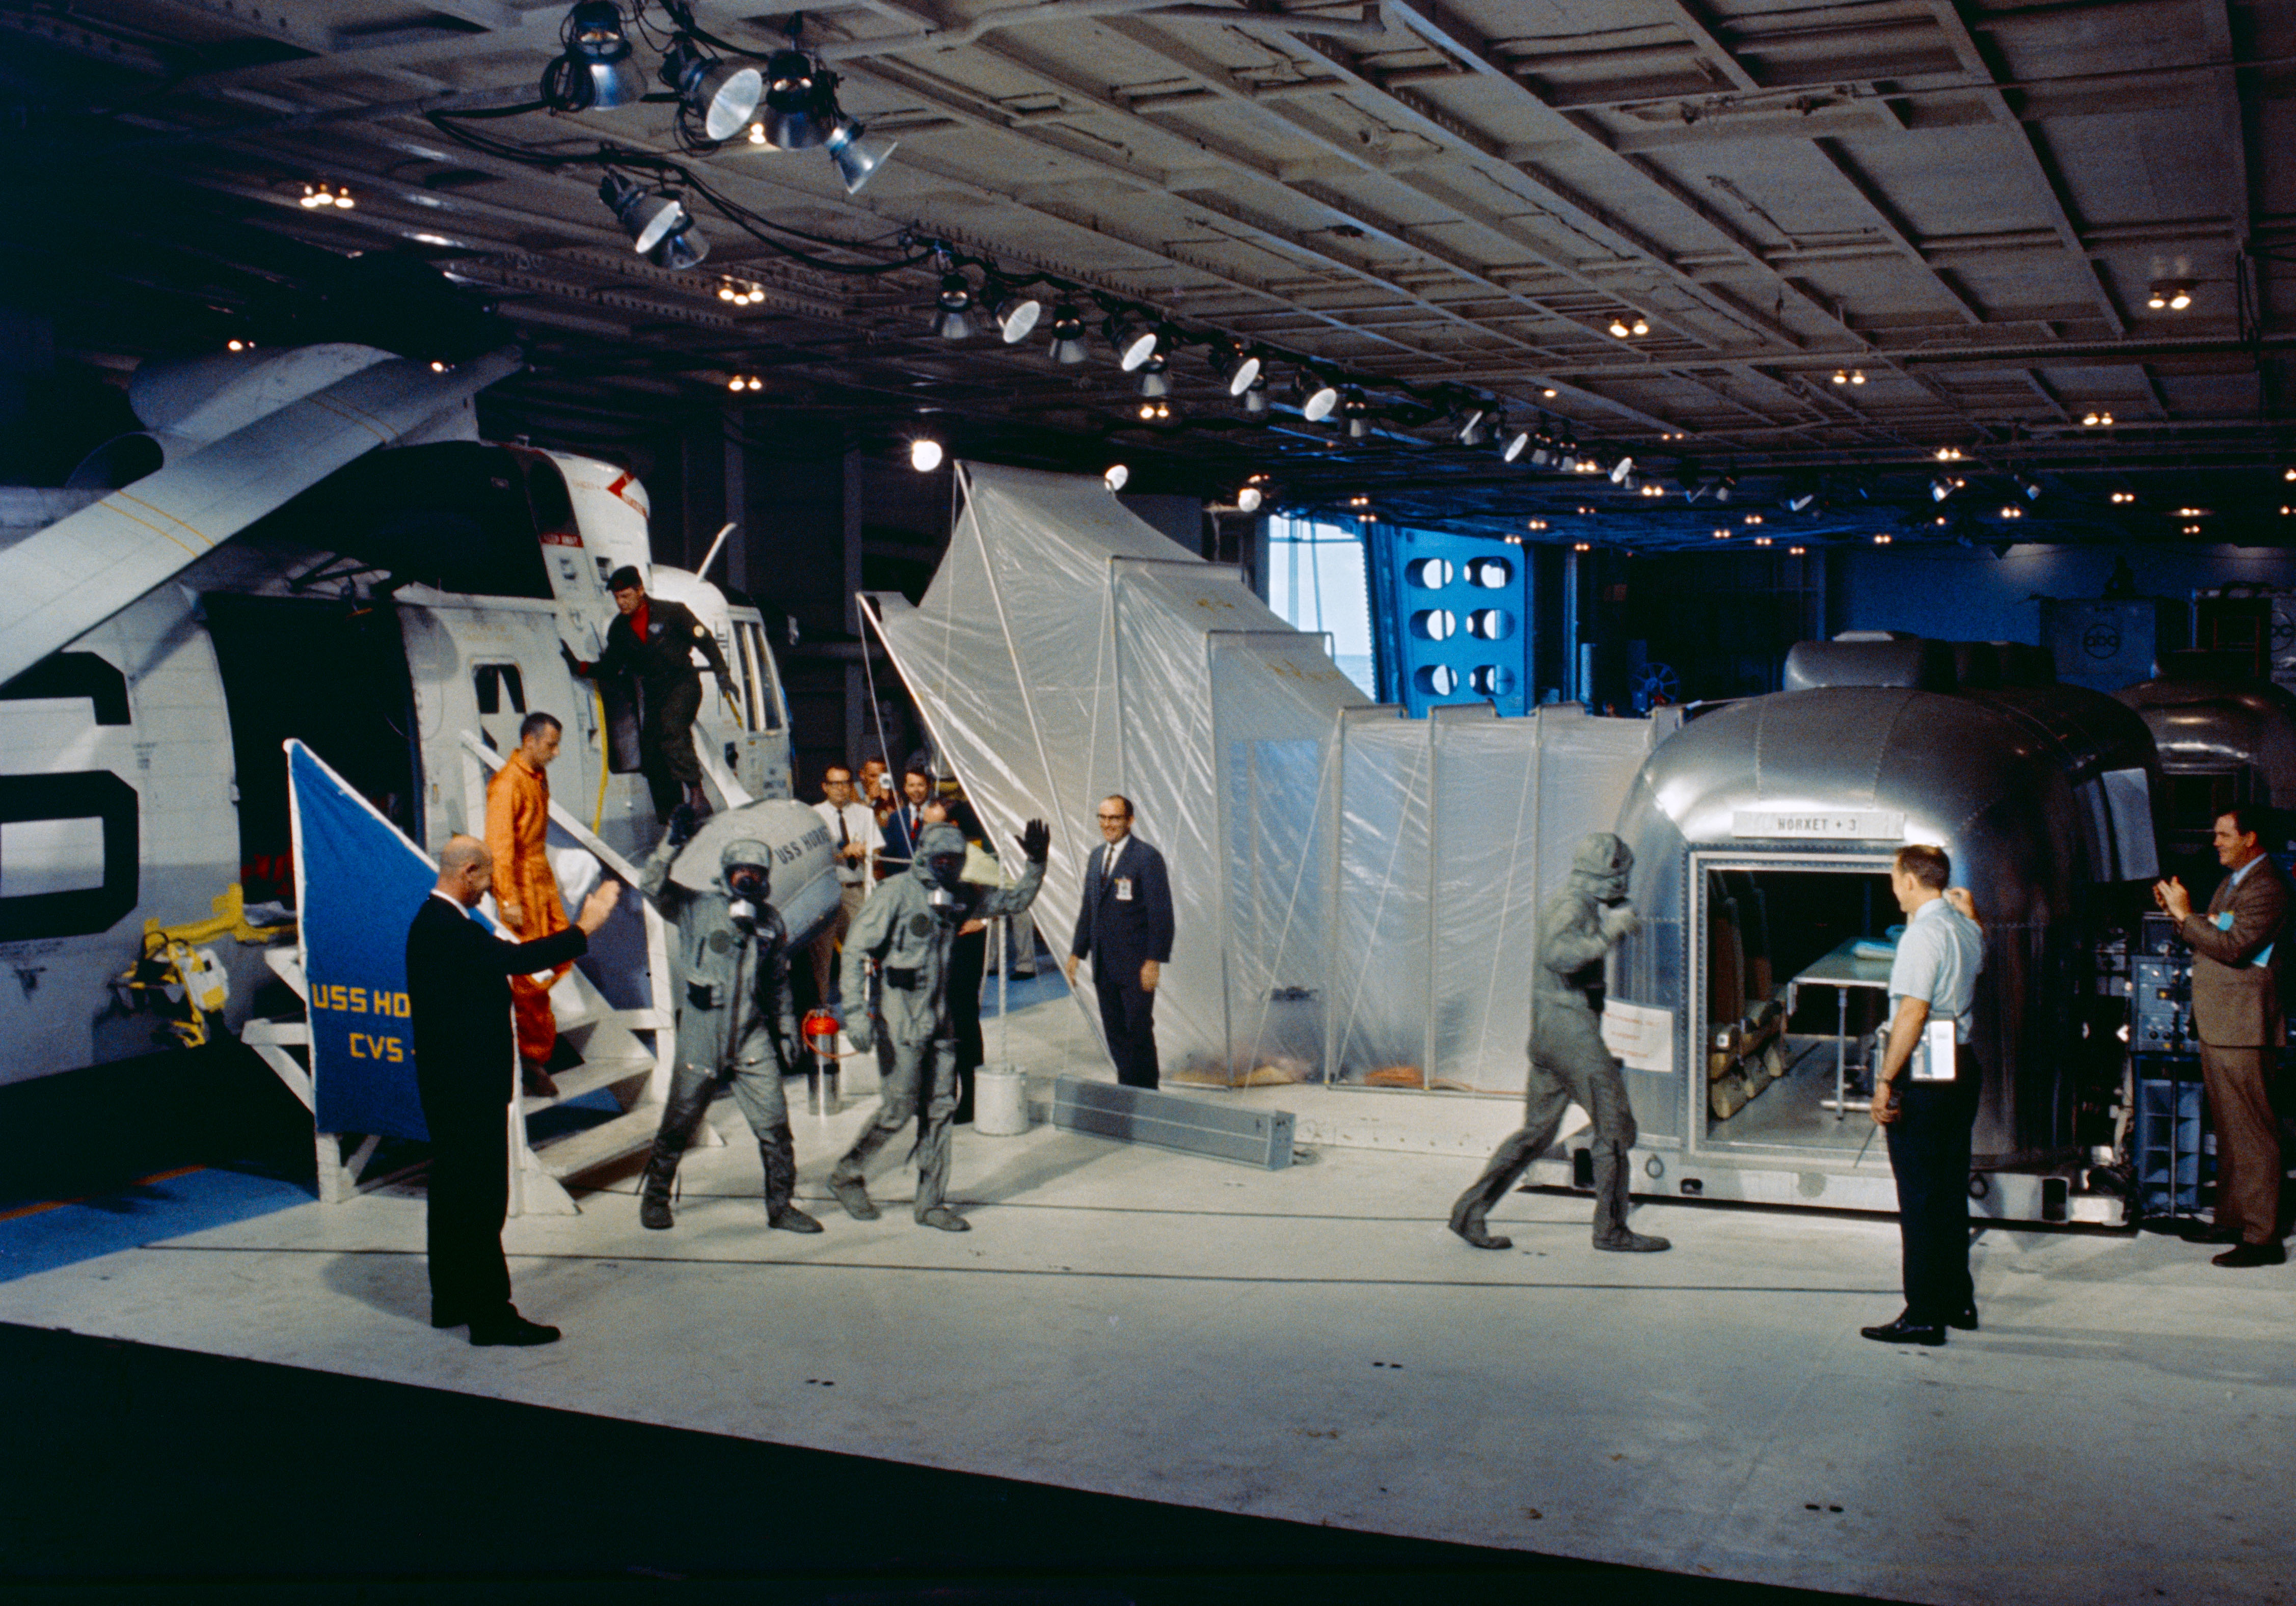 Once aboard the U.S.S. Hornet, Mike, Neil, and Buzz wearing their BIGs walk the 10 steps from the Recovery One helicopter to the Mobile Quarantine Facility (MQF), with NASA flight surgeon Dr. William Carpentier, in orange suit, following behind